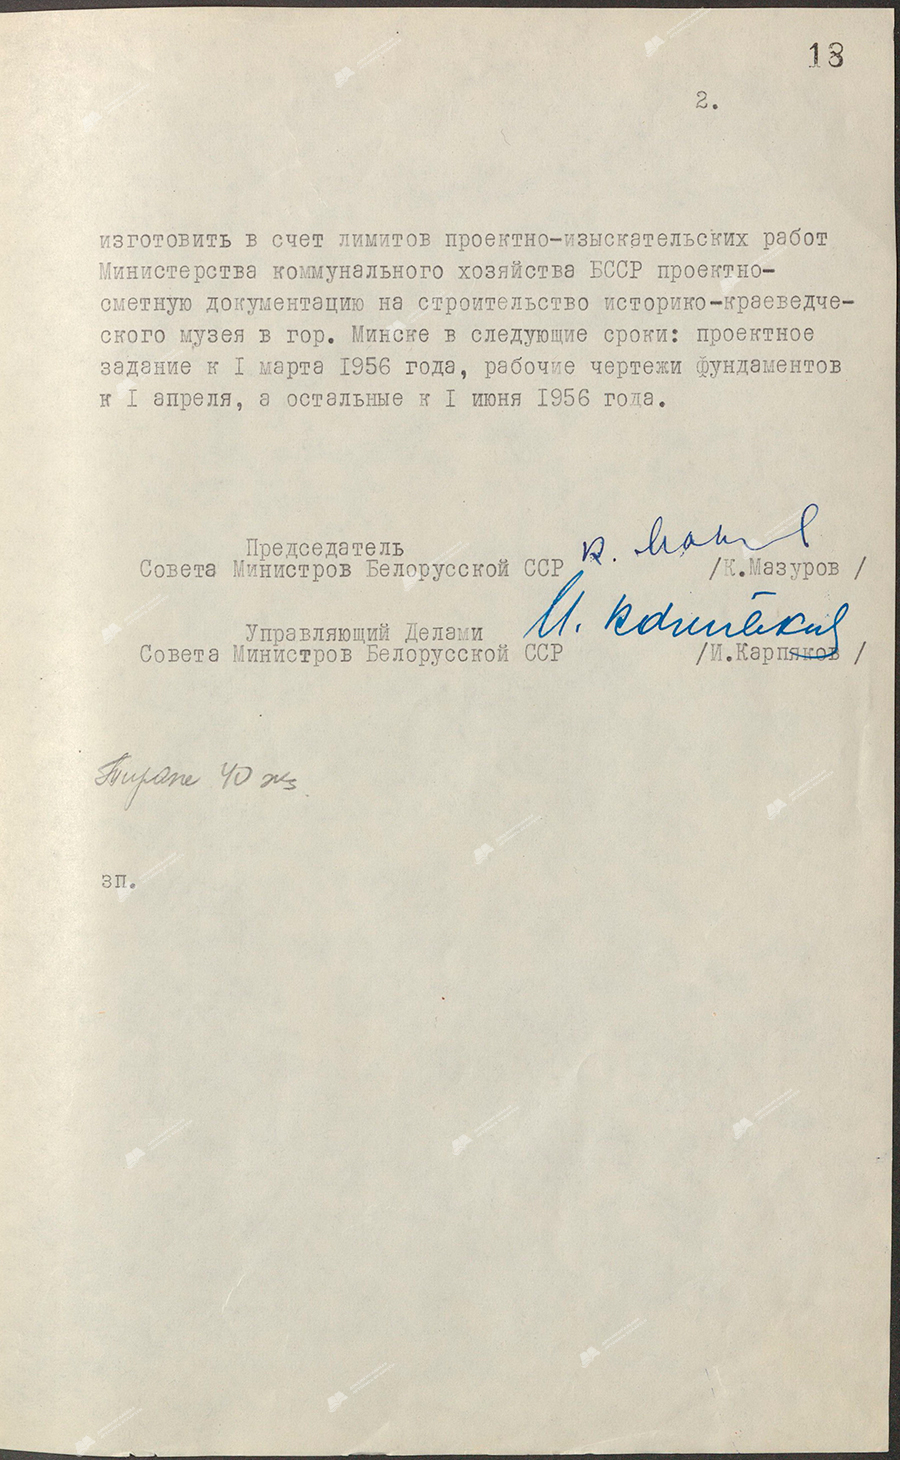 Resolution No. 4 of the Council of Ministers of the Byelorussian SSR «On construction in the city. Minsk Museum of History and Local Lore»-стр. 2